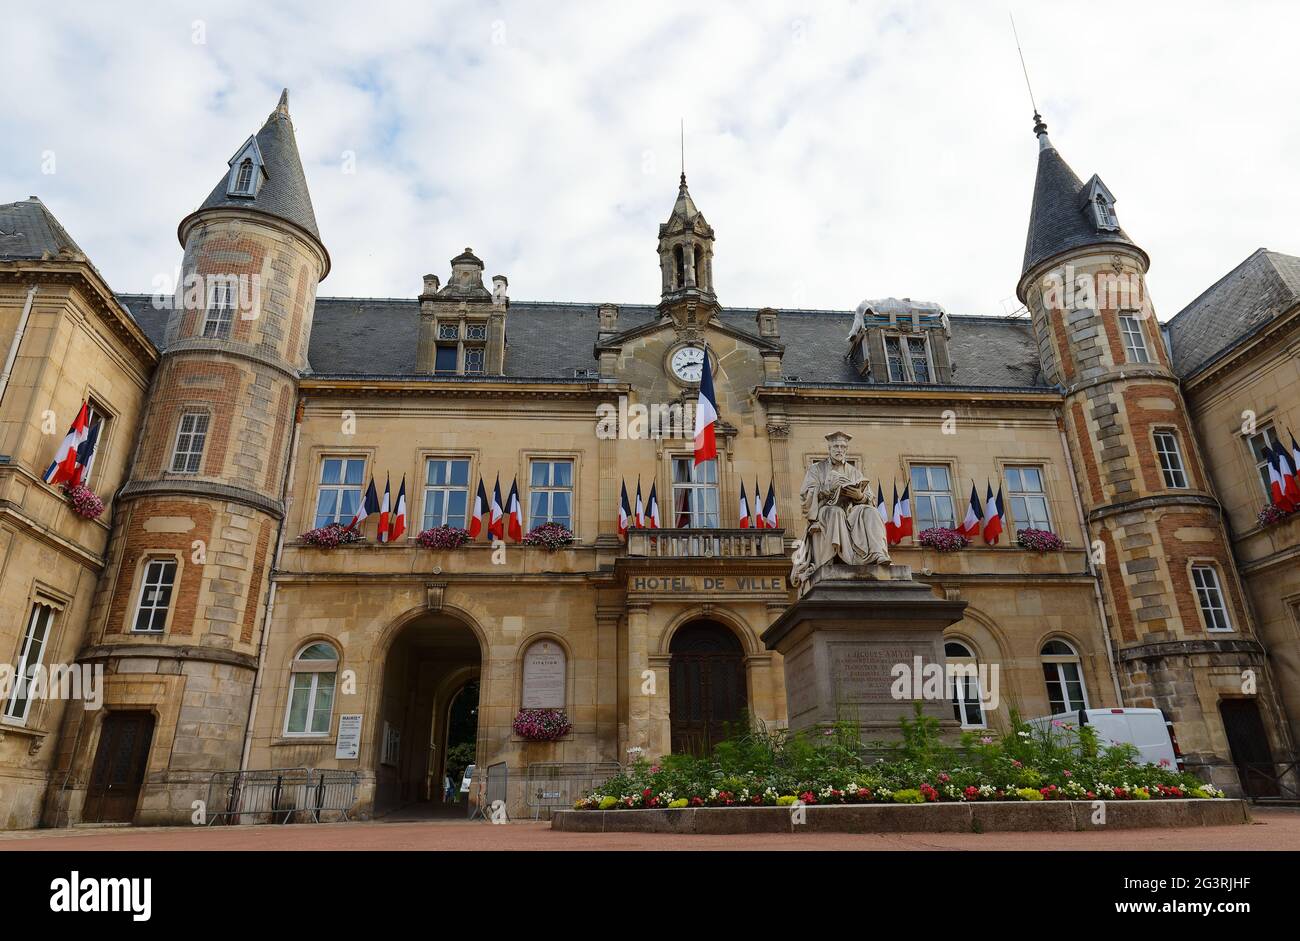 Successively a convent, a luxury dwelling and a tax office, this 19th-century building in Melun is now the Town Hall. Parisian region, France. Stock Photo